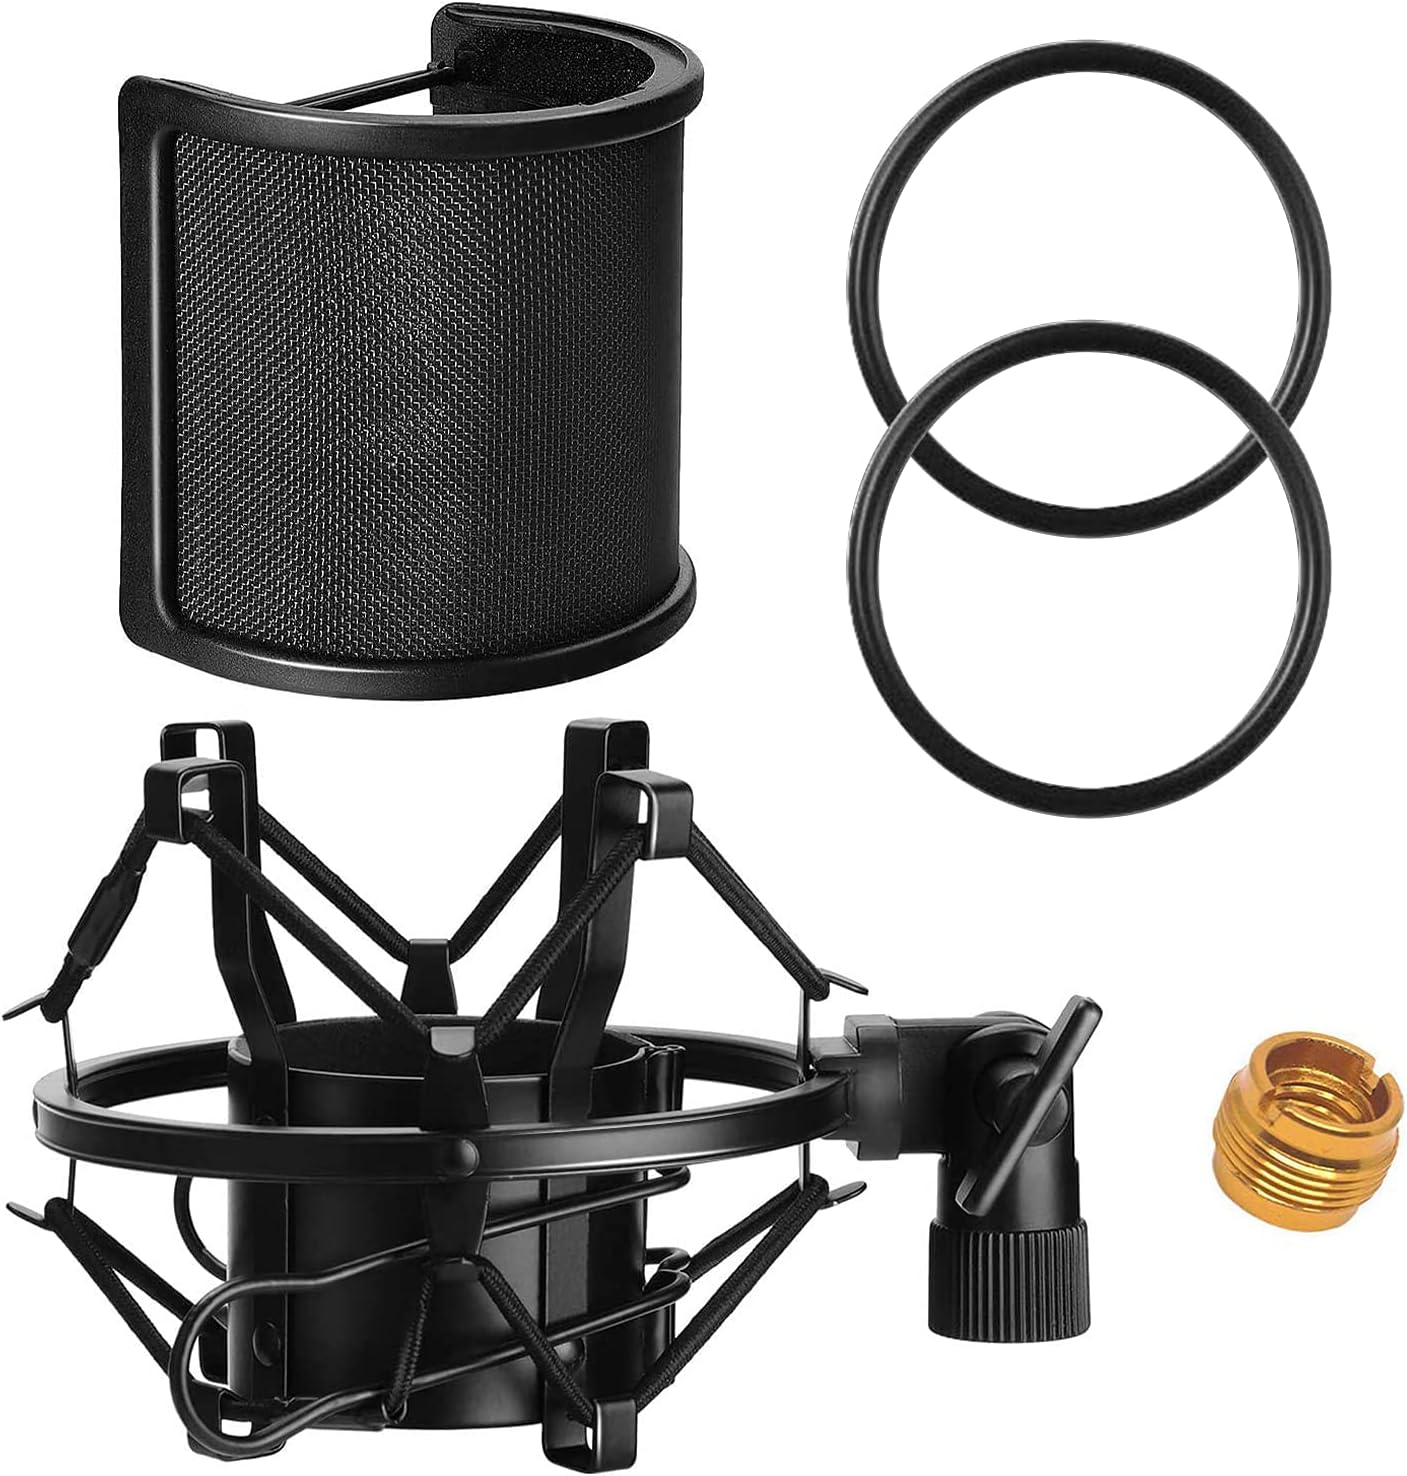 Microphone Shock Mount with Pop Filter, PEMOTech Mic Anti-Vibration Suspension Shock Mount Holder for 46mm-53mm Diameter Microphone, Compatible for AT2020 Microphone Shock Mount Bonus Screw Adapter